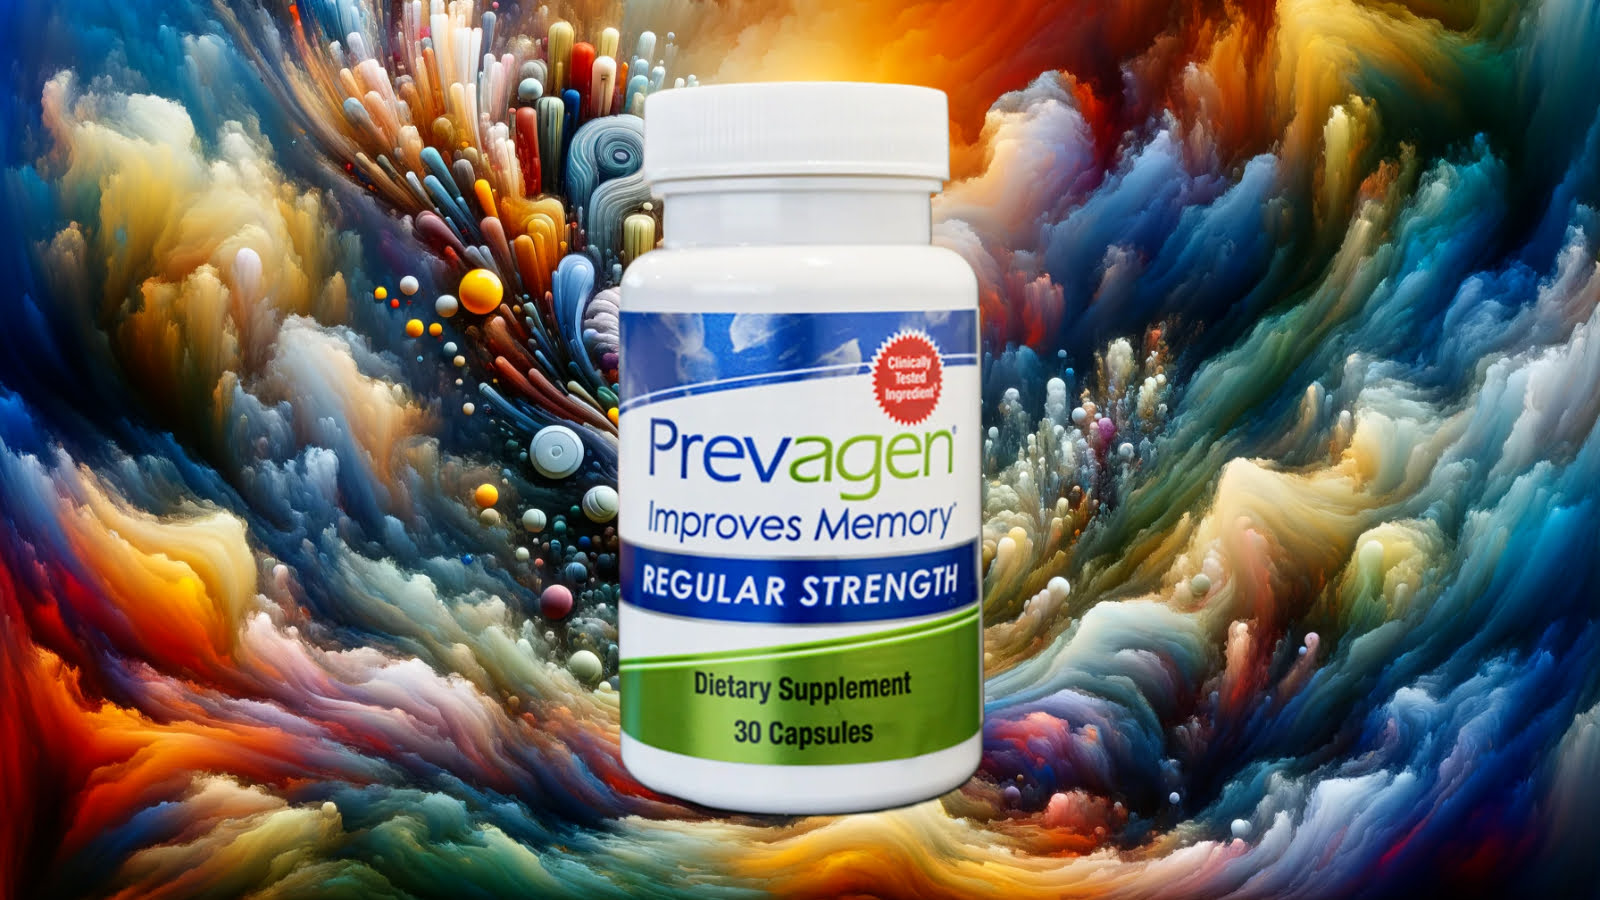 Comprehensive review of Prevagen, focusing on its ingredients, side effects, and alternative cognitive health options